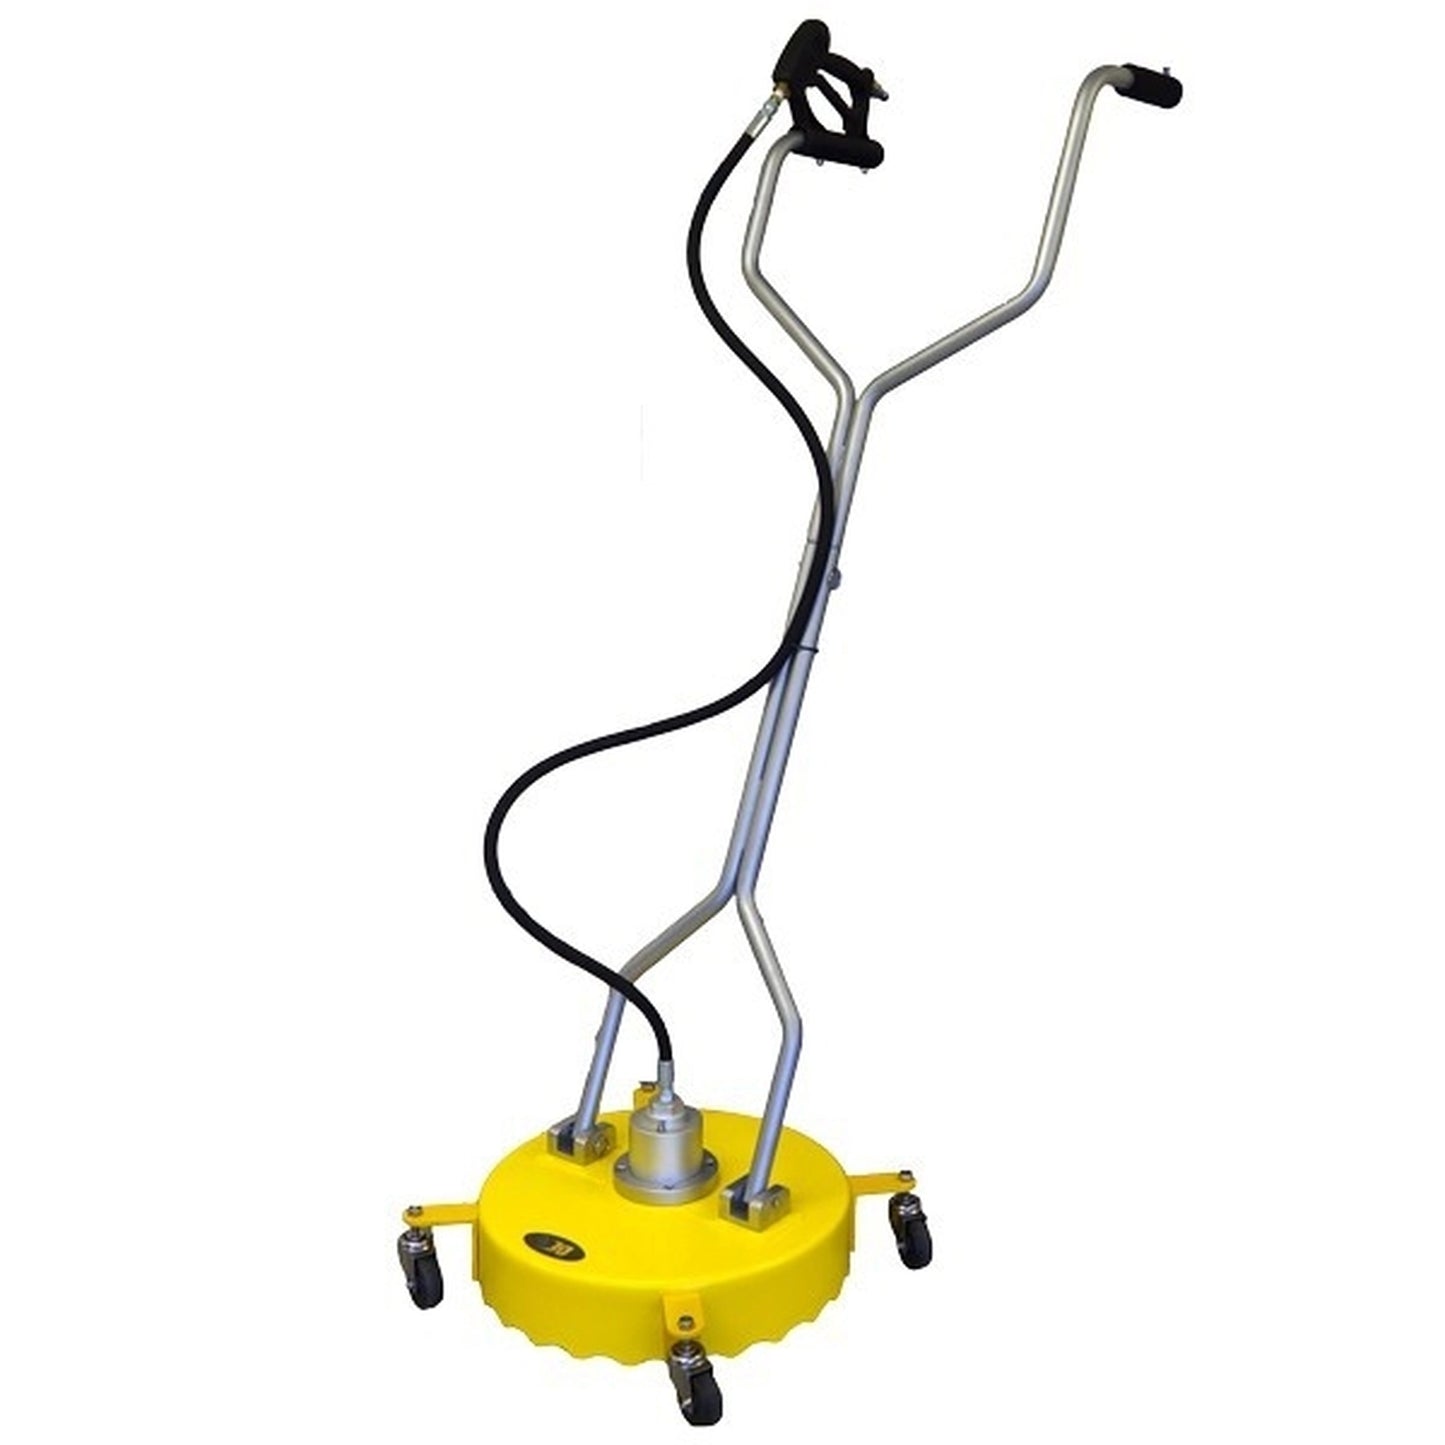 BE Pressure 85.403.005 Whirlaway Rotary Flat Surface Cleaner 18"